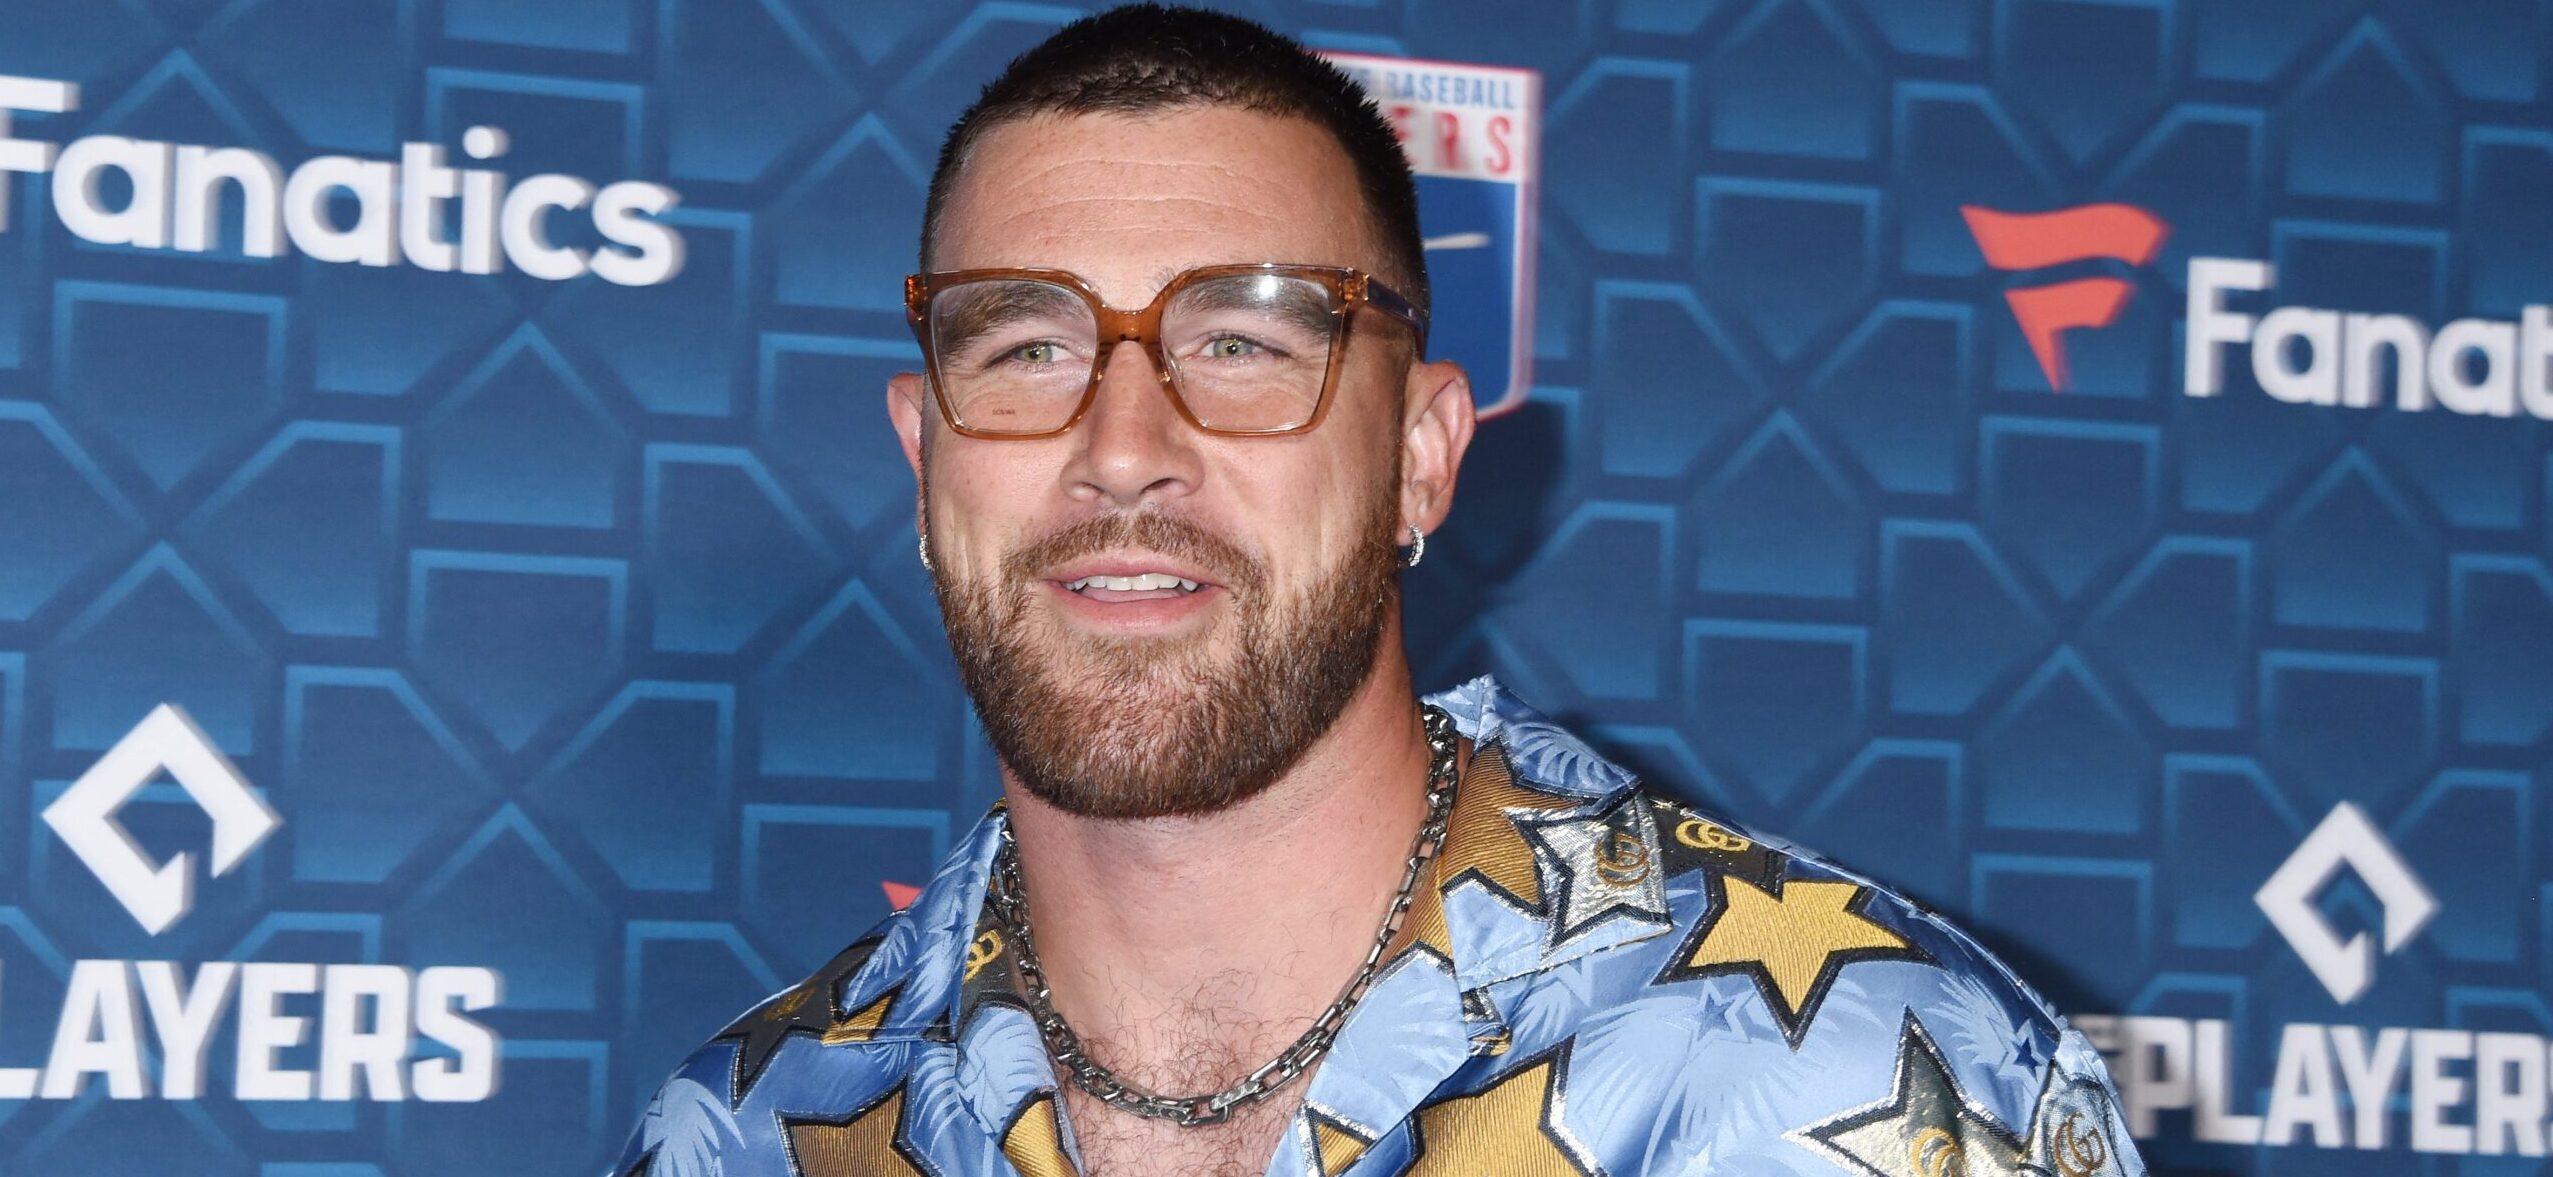 NFL's Travis Kelce Reveals His Insane Game-Day Fashion Ritual